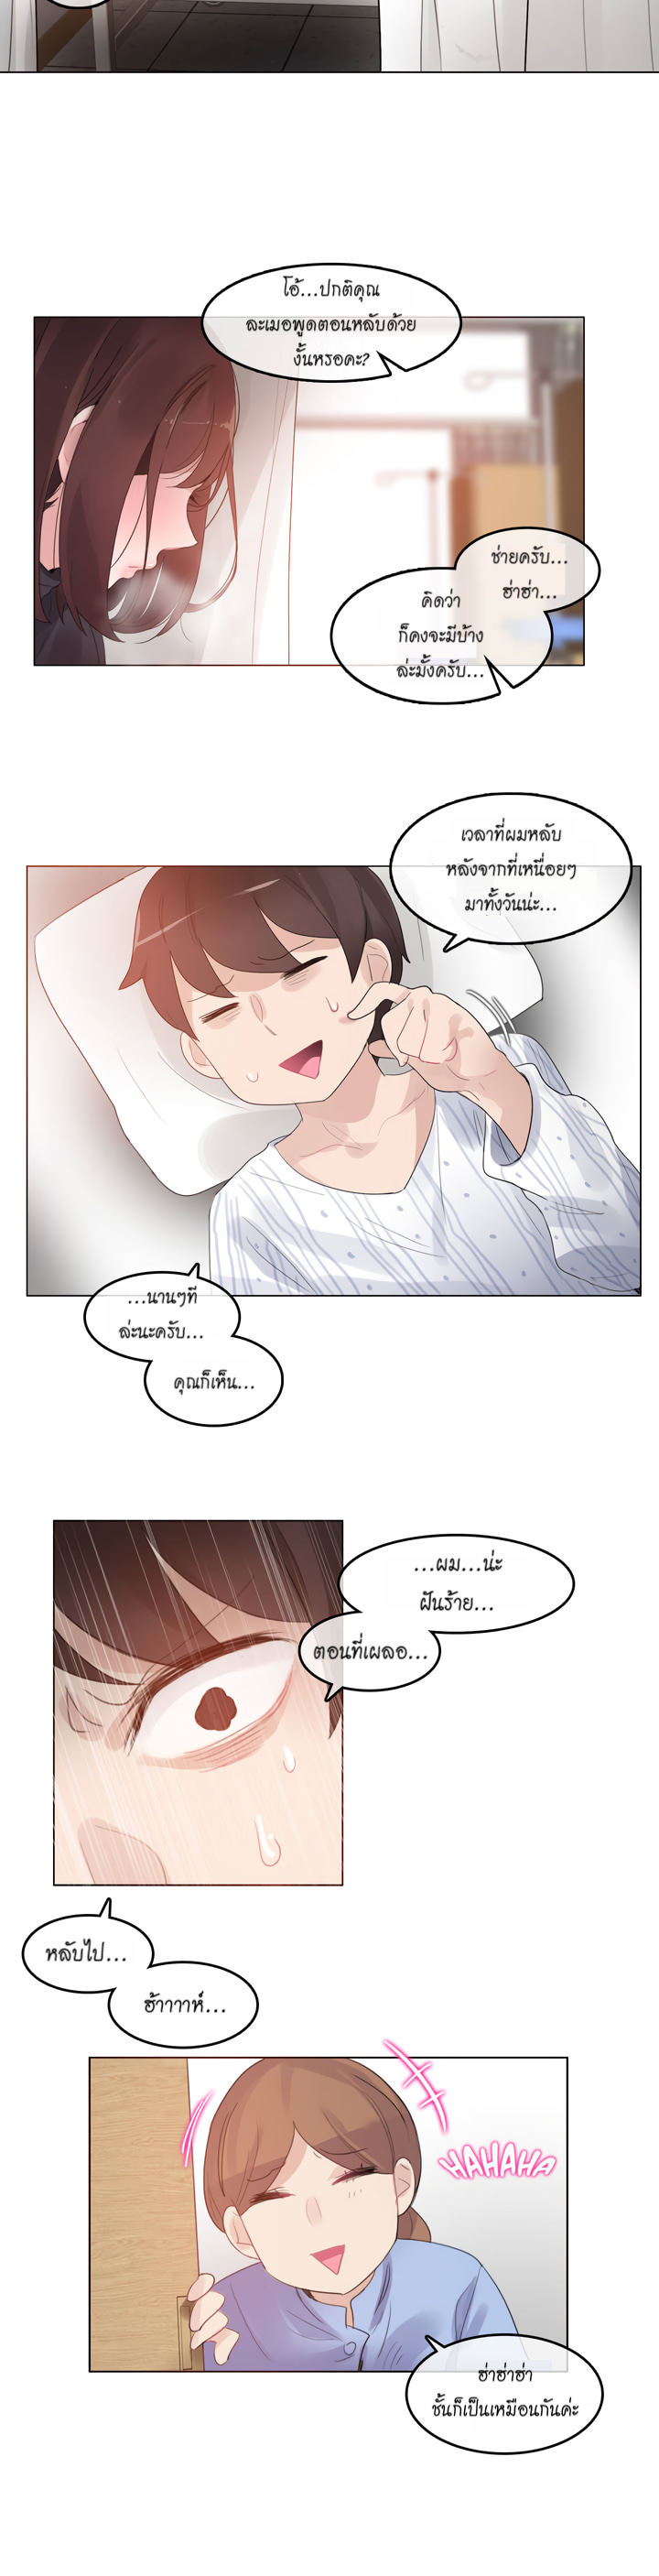 A Pervert’s Daily Life51 (9)